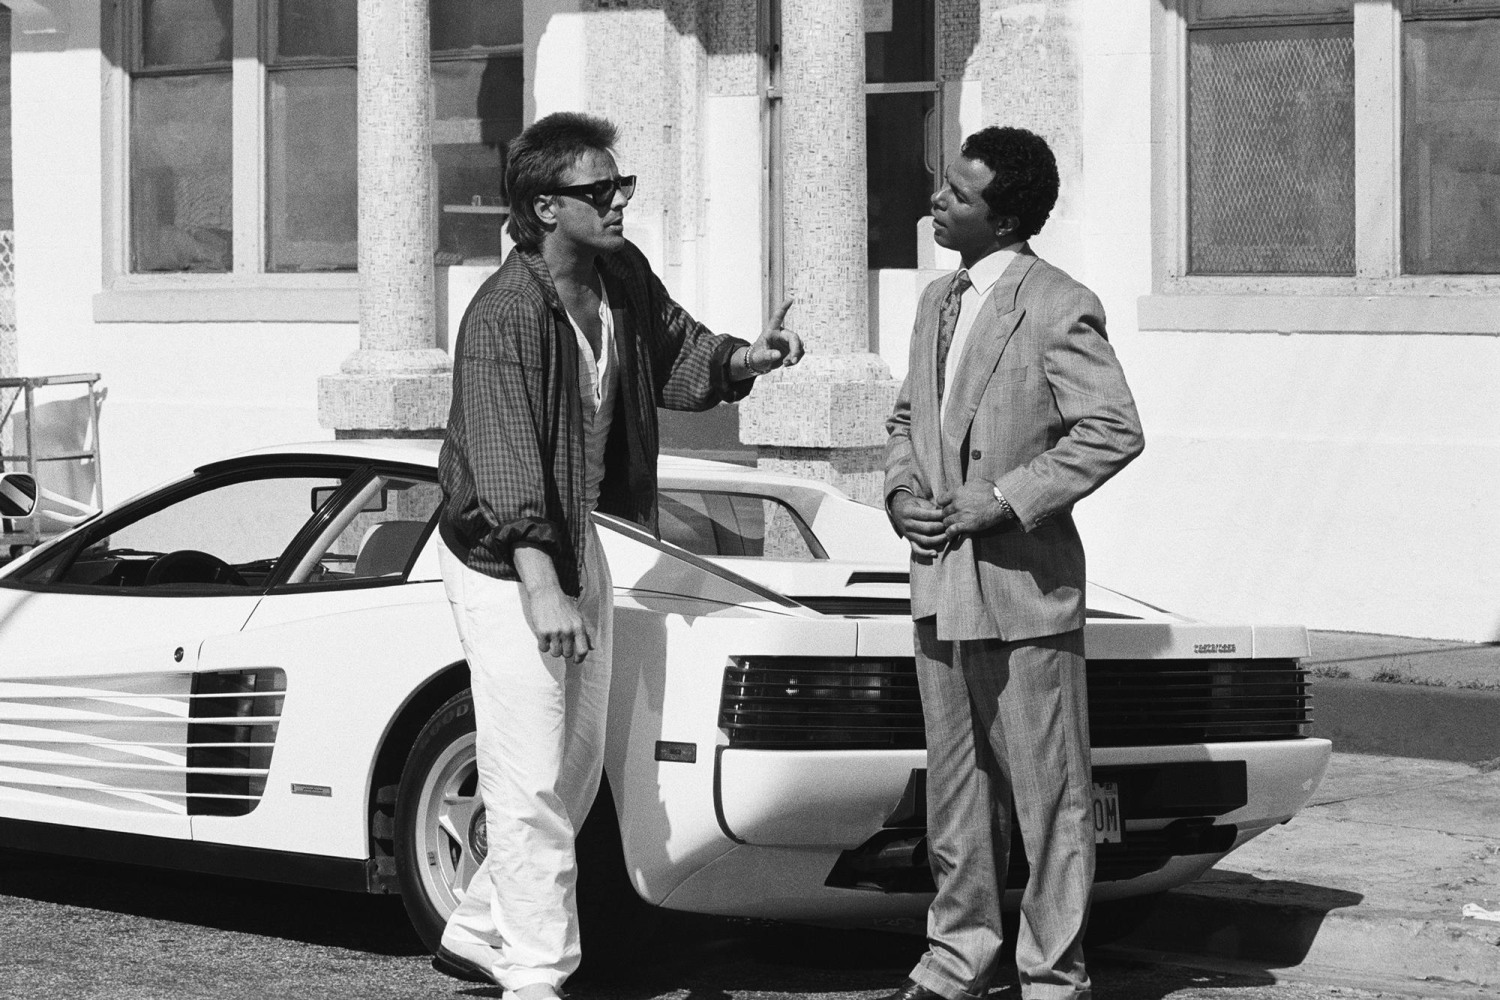 Miami Vice' Ferrari Could Be Yours for $1.75 Million